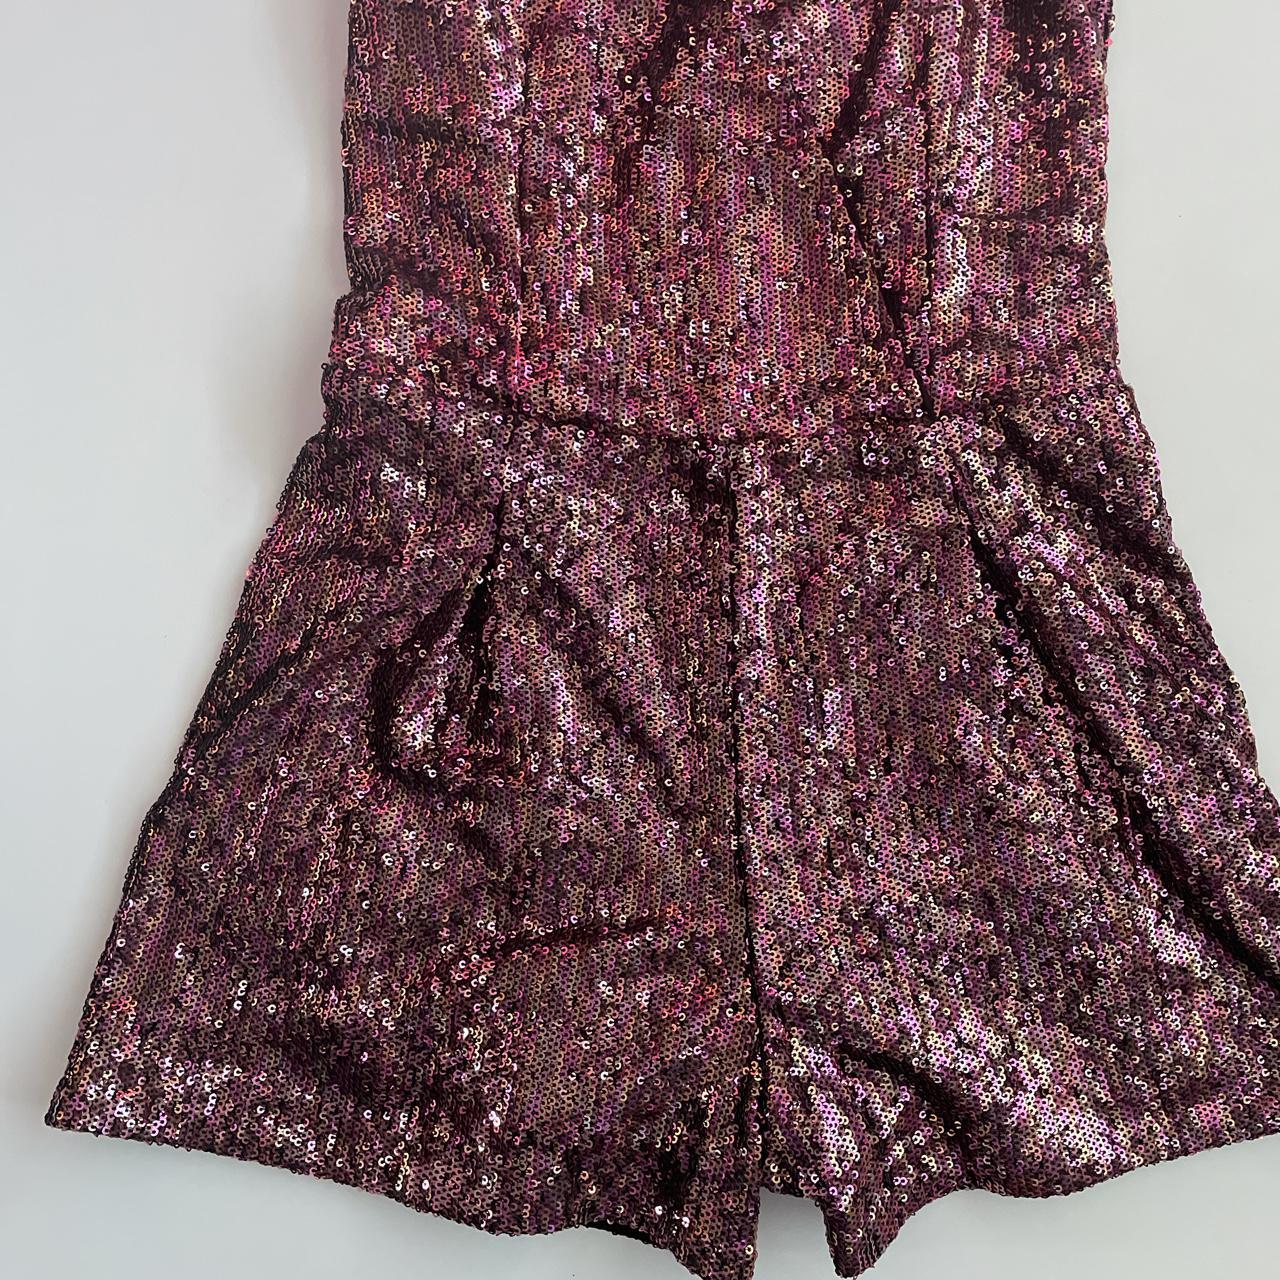 stunning glitter sequence play suit, perfect for a... - Depop